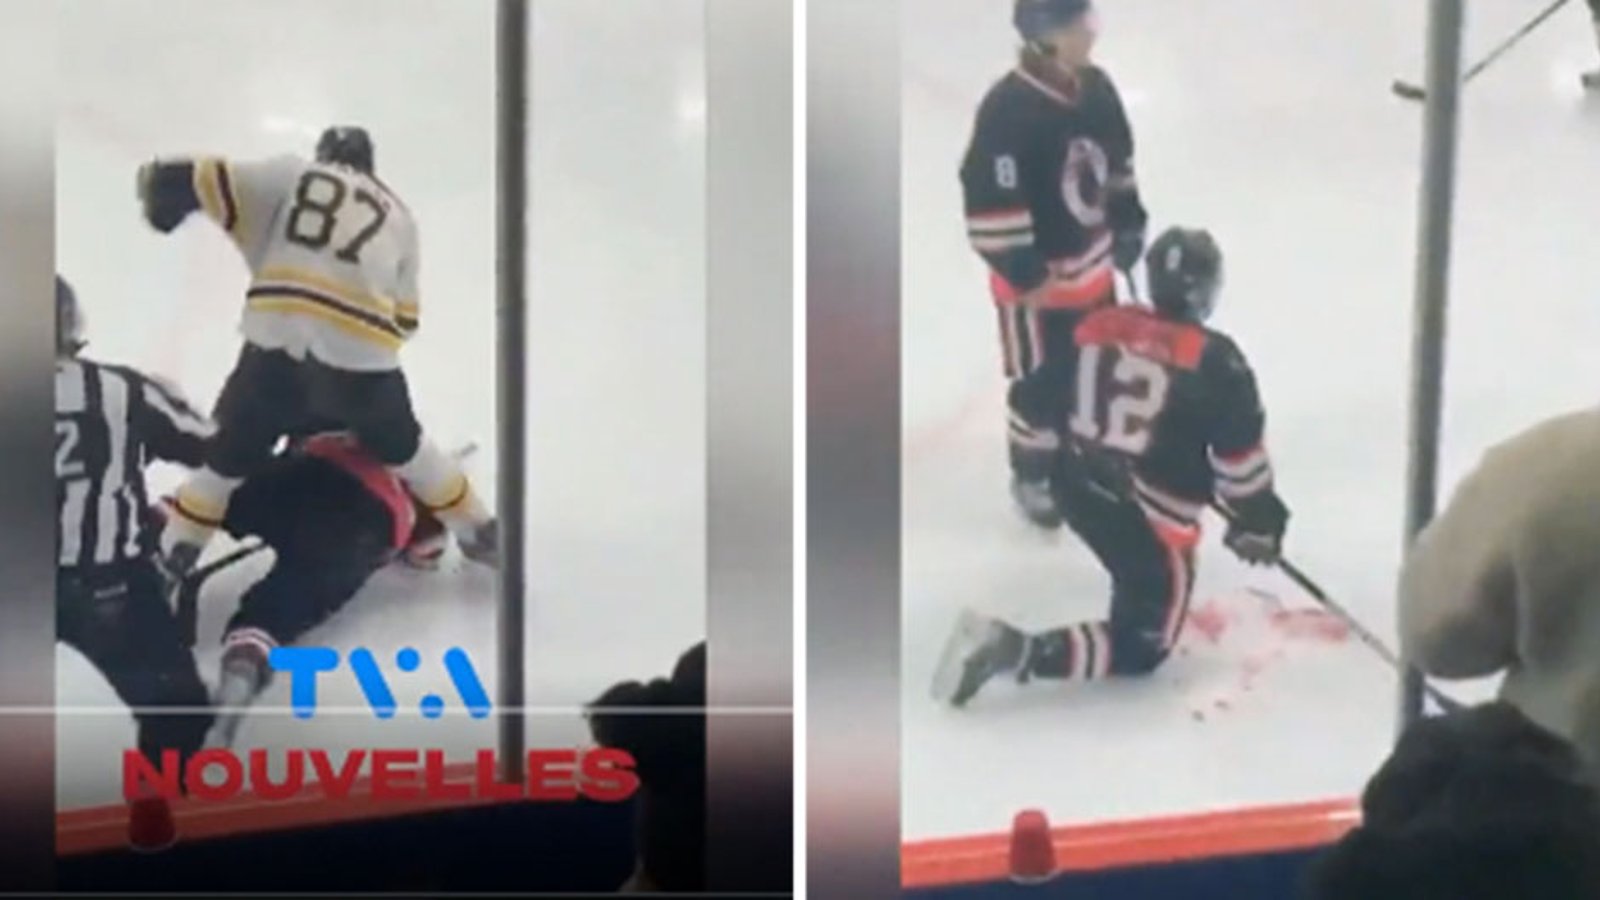 51 year old Donald Brashear ejected from game after attacking two opponents